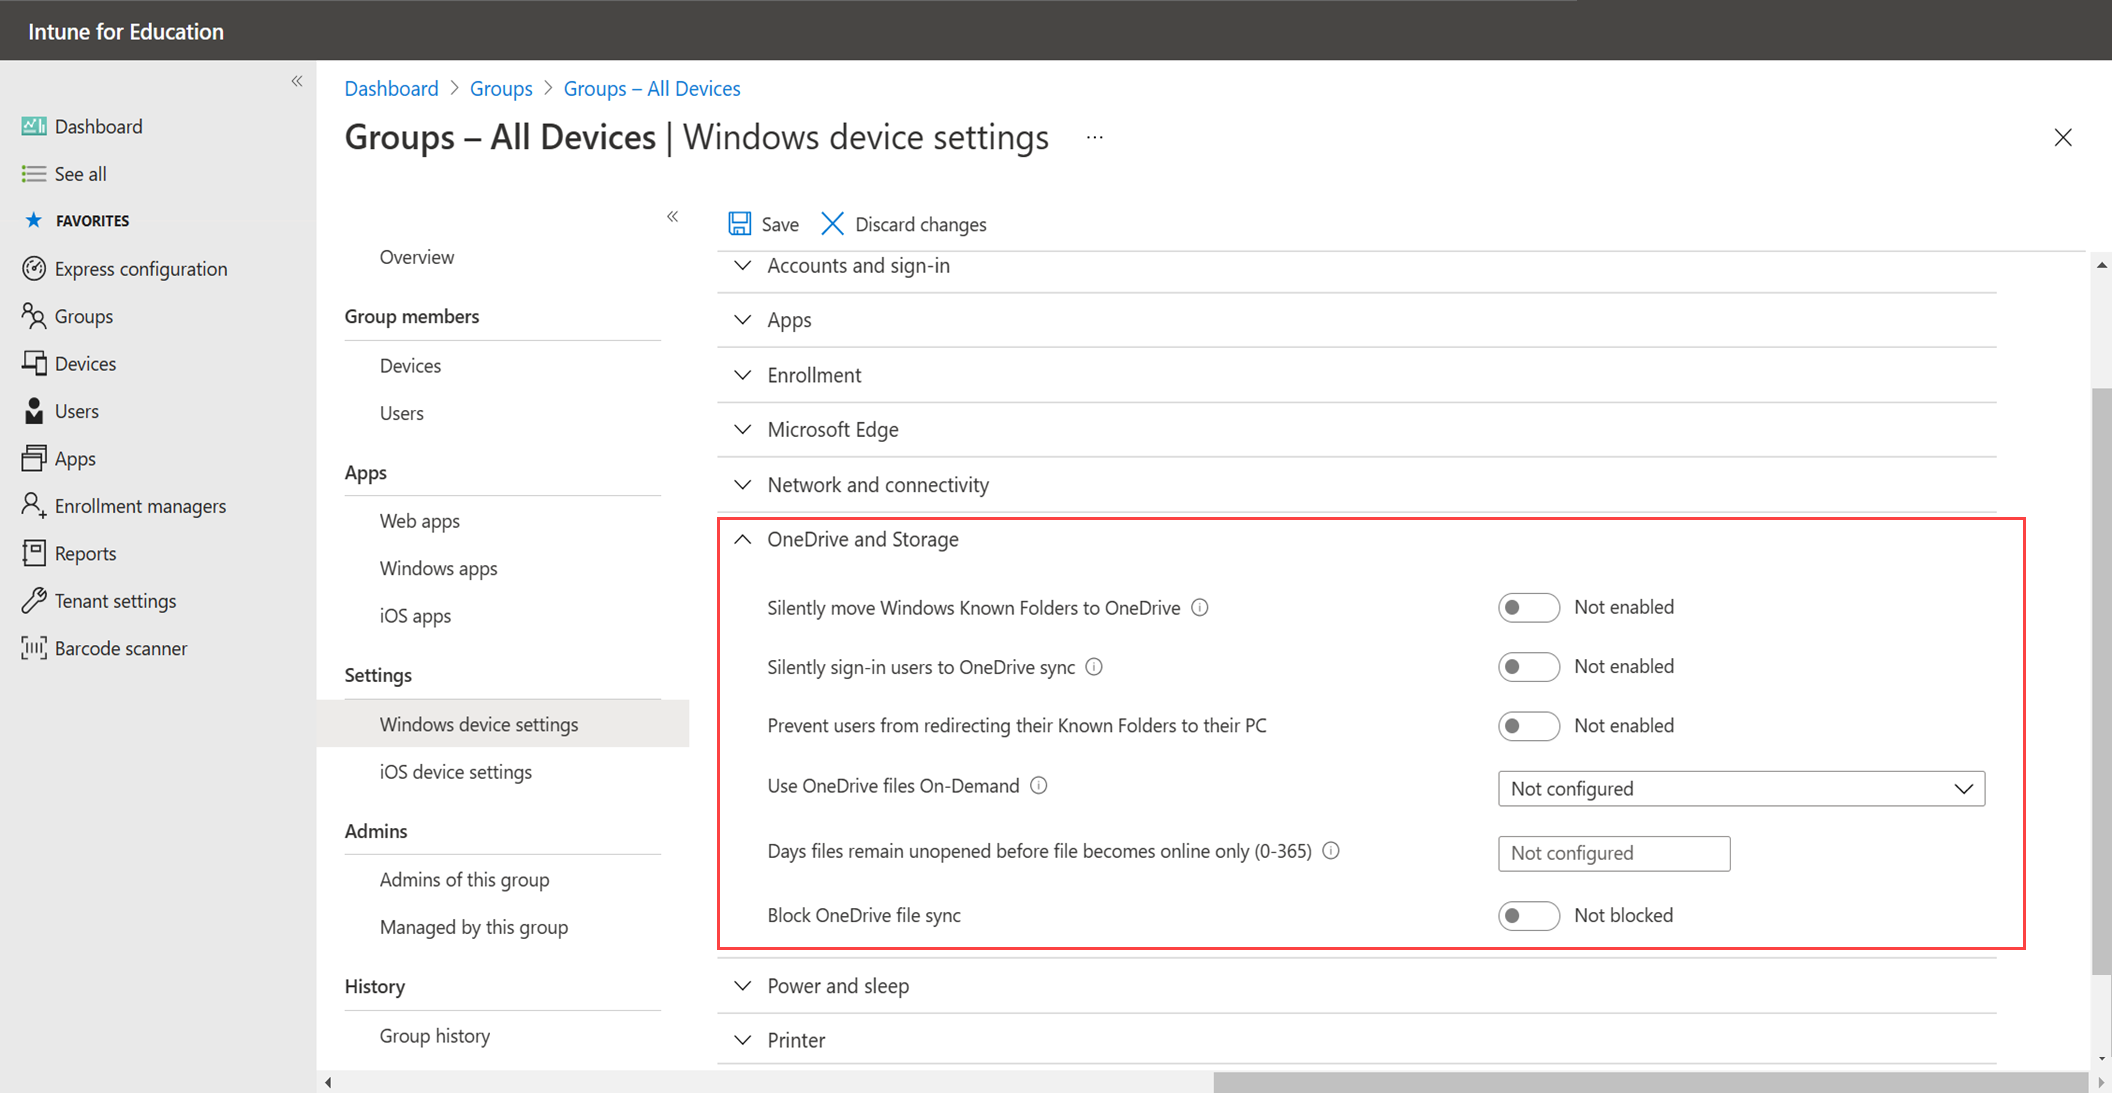 Example image highlighting the new OneDrive & storage category in Widows device settings.